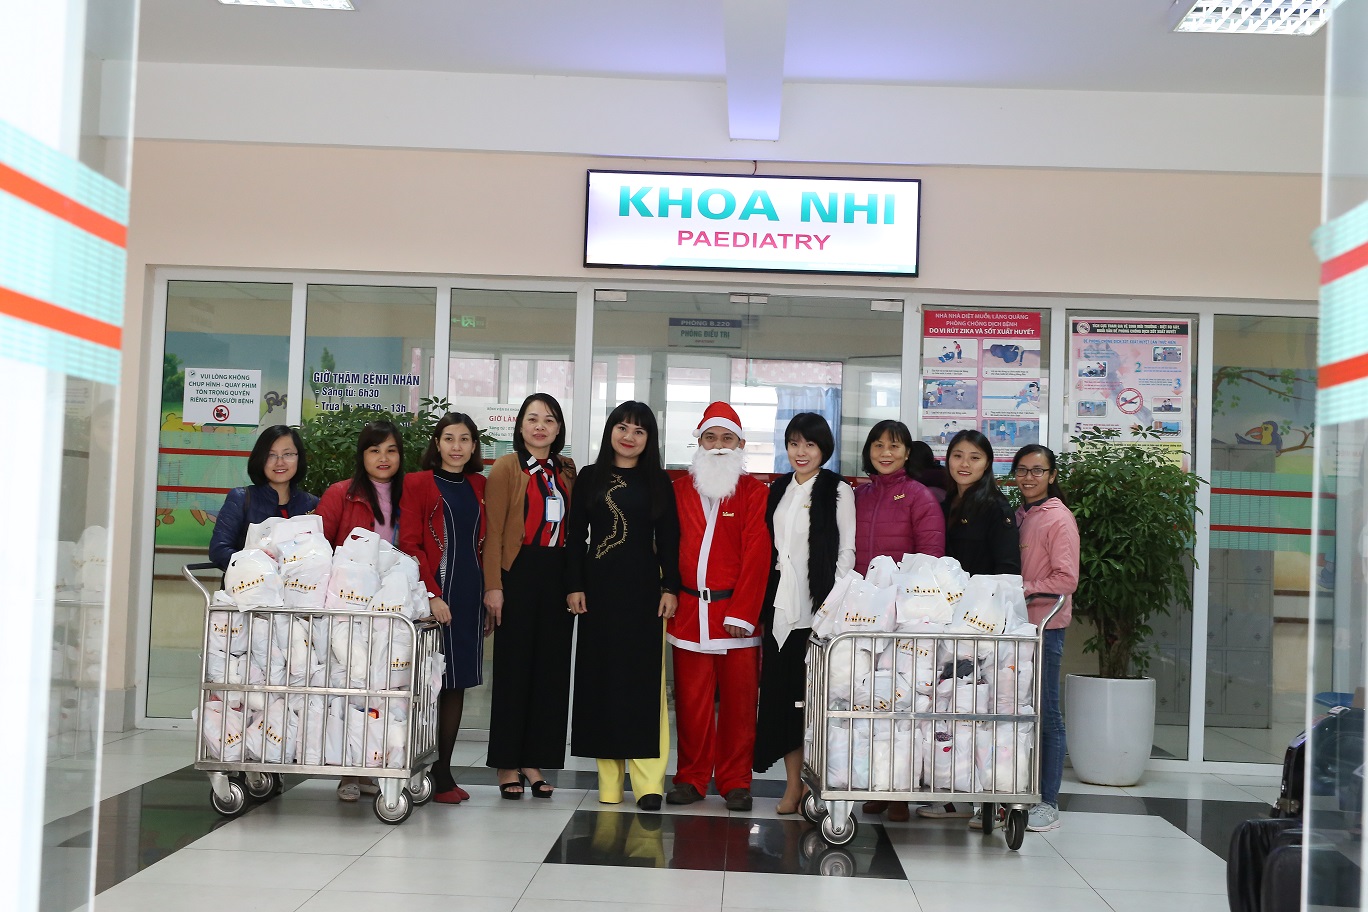 The program giving Christmas gifts for children in Duc Giang Hospital